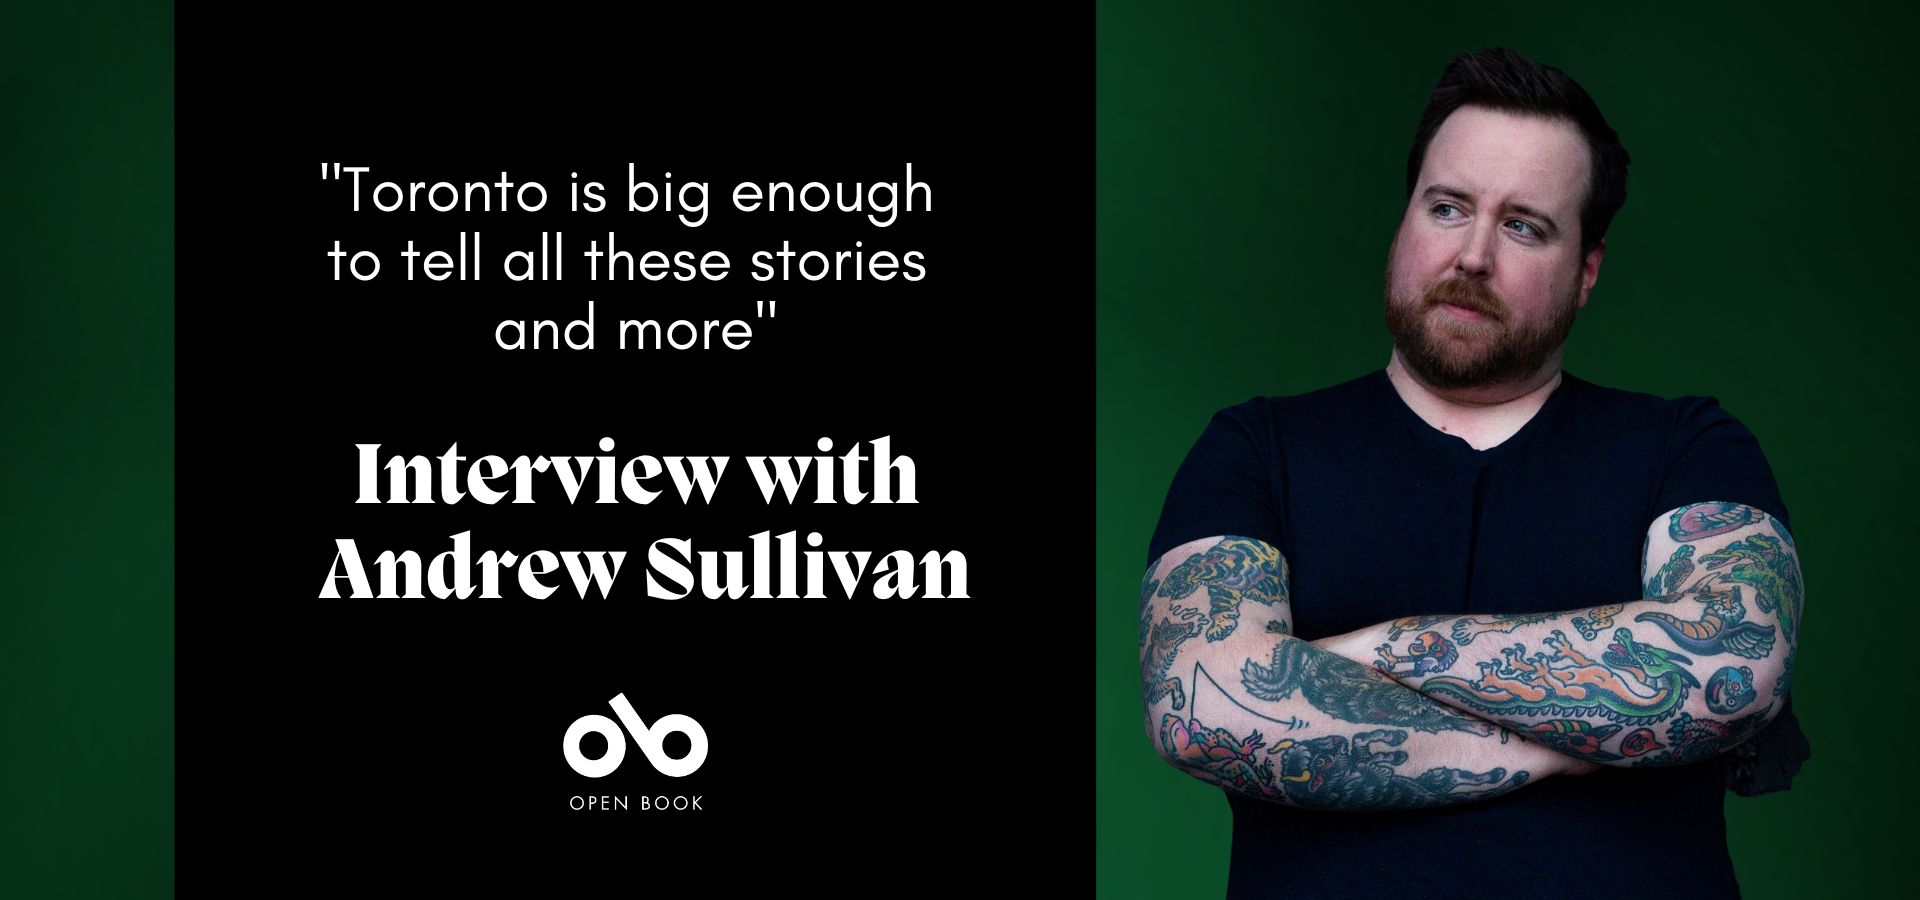 Green and black banner image with a photo of author Andrew Sullivan on the right and the text "Toronto is big enough to tell all these stories and more. Interview with Andrew Sullivan" on the right. Open Book logo centred below text.